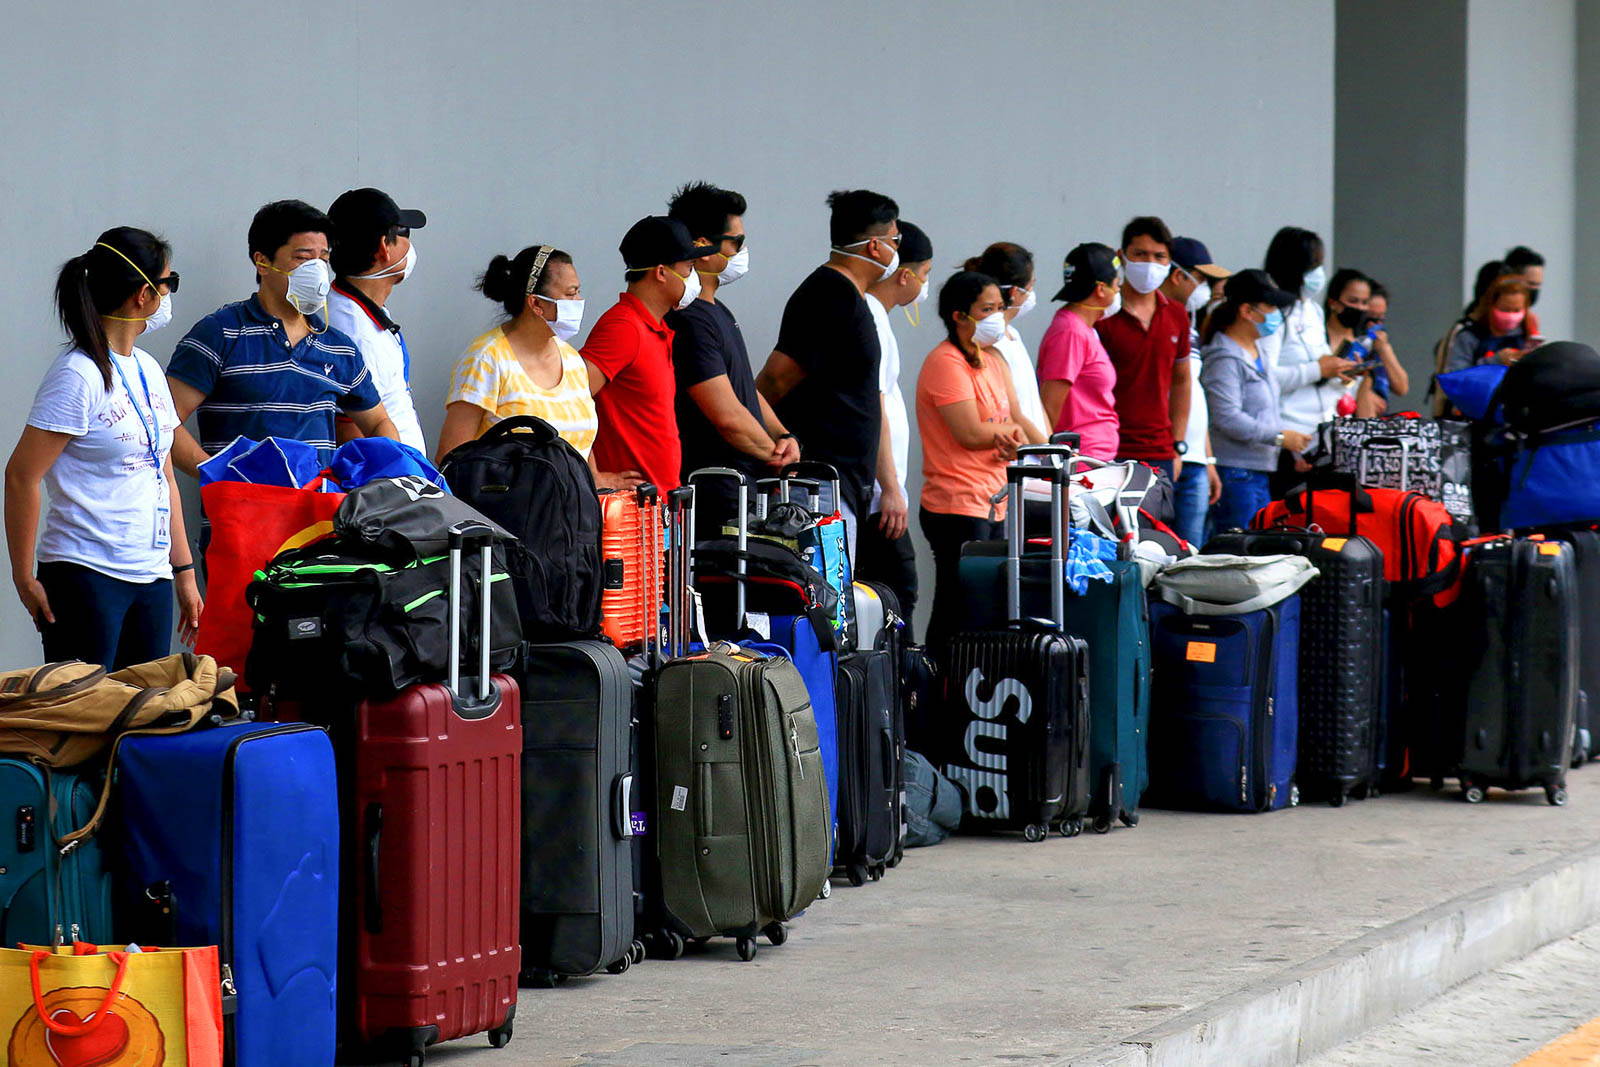 LONG WAIT. It's a long, agonizing journey home for many OFWs stranded in Metro Manila. Here, OFWs wait to get into the PITX terminal in Parañaque City on May 28, 2020. Photo by Inoue Jaena/Rappler    